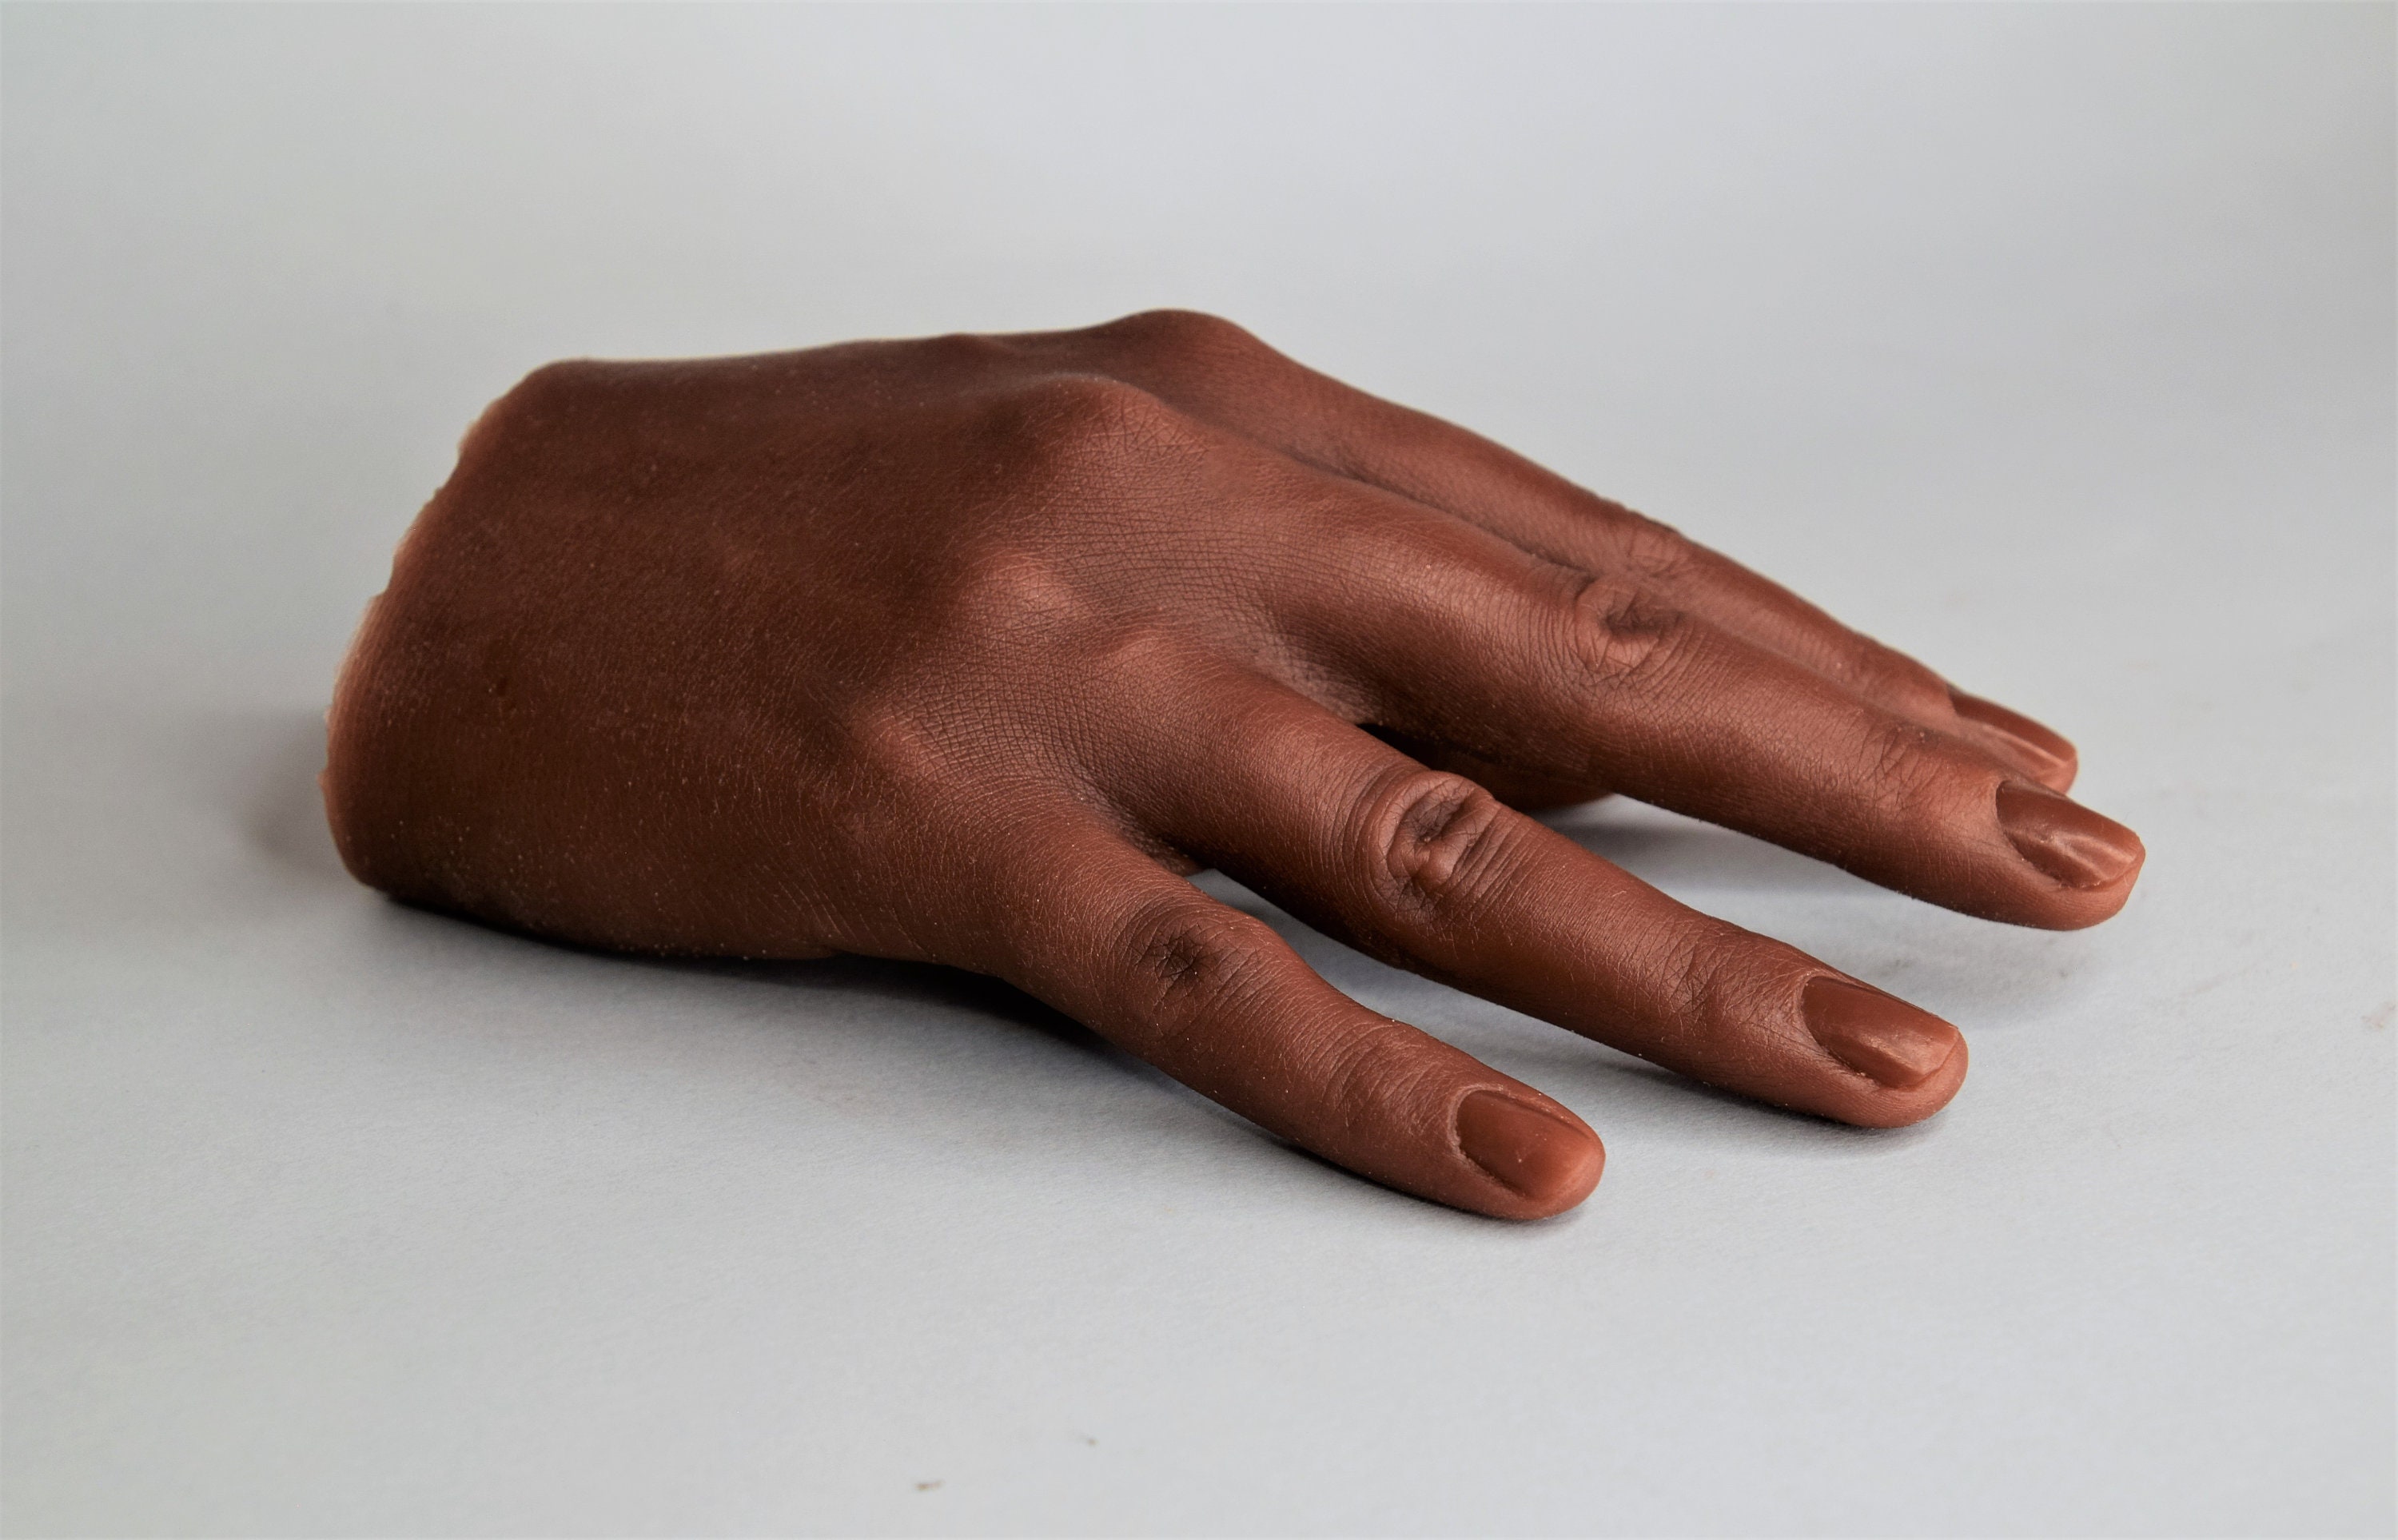 Realistic Silicone Hand With Nails, Severed Silicone Hand Dark Tone 